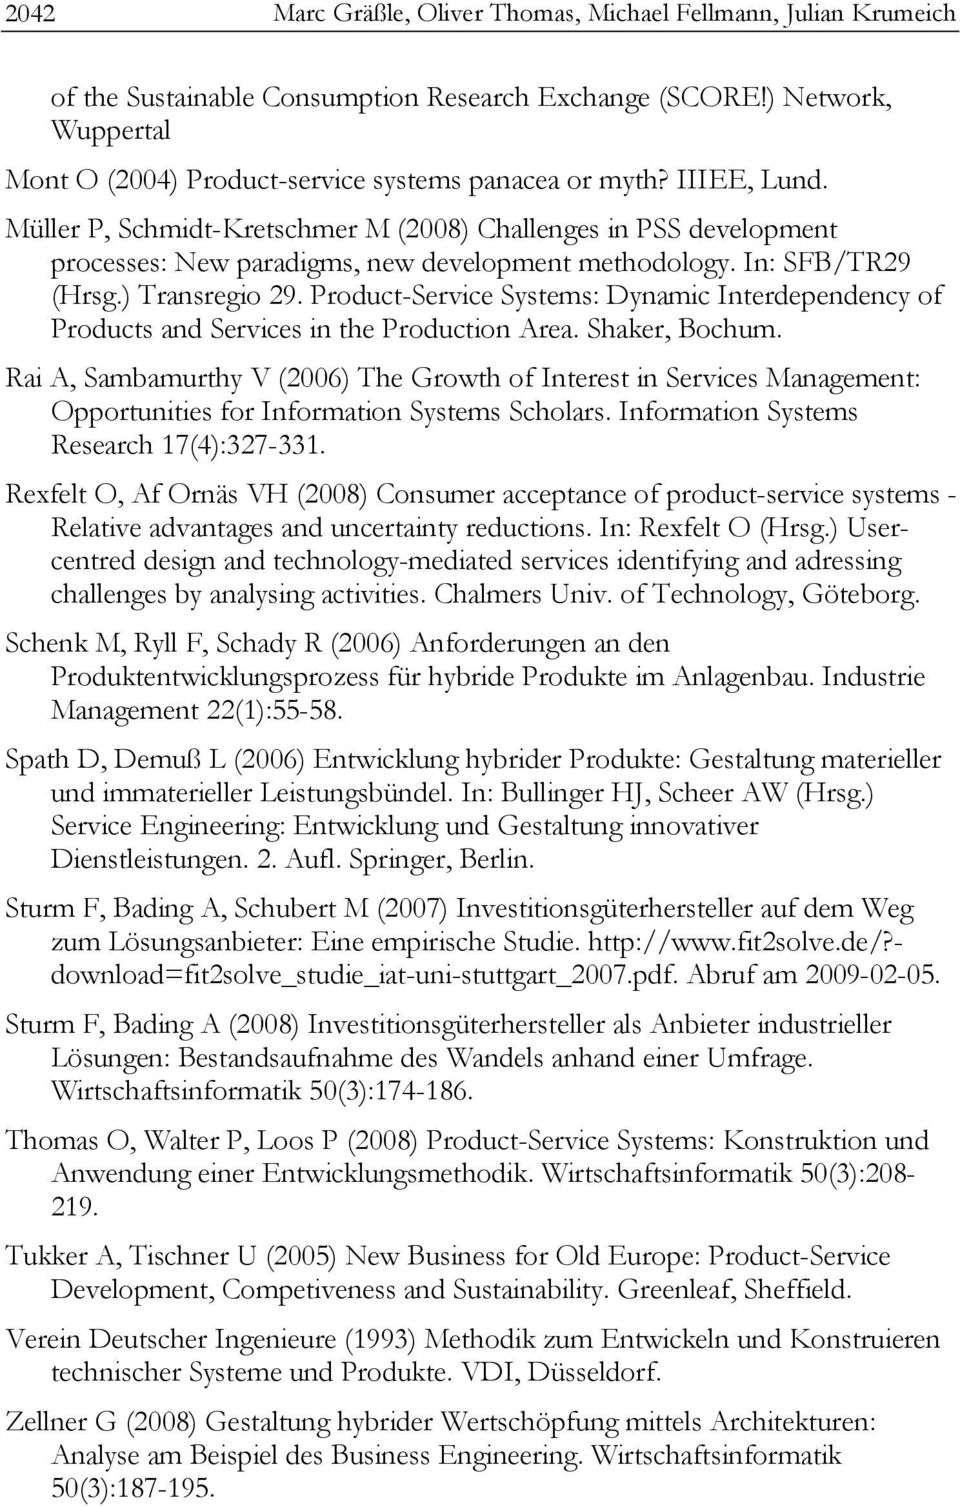 Product-Service Systems: Dynamic Interdependency of Products and Services in the Production Area. Shaker, Bochum.